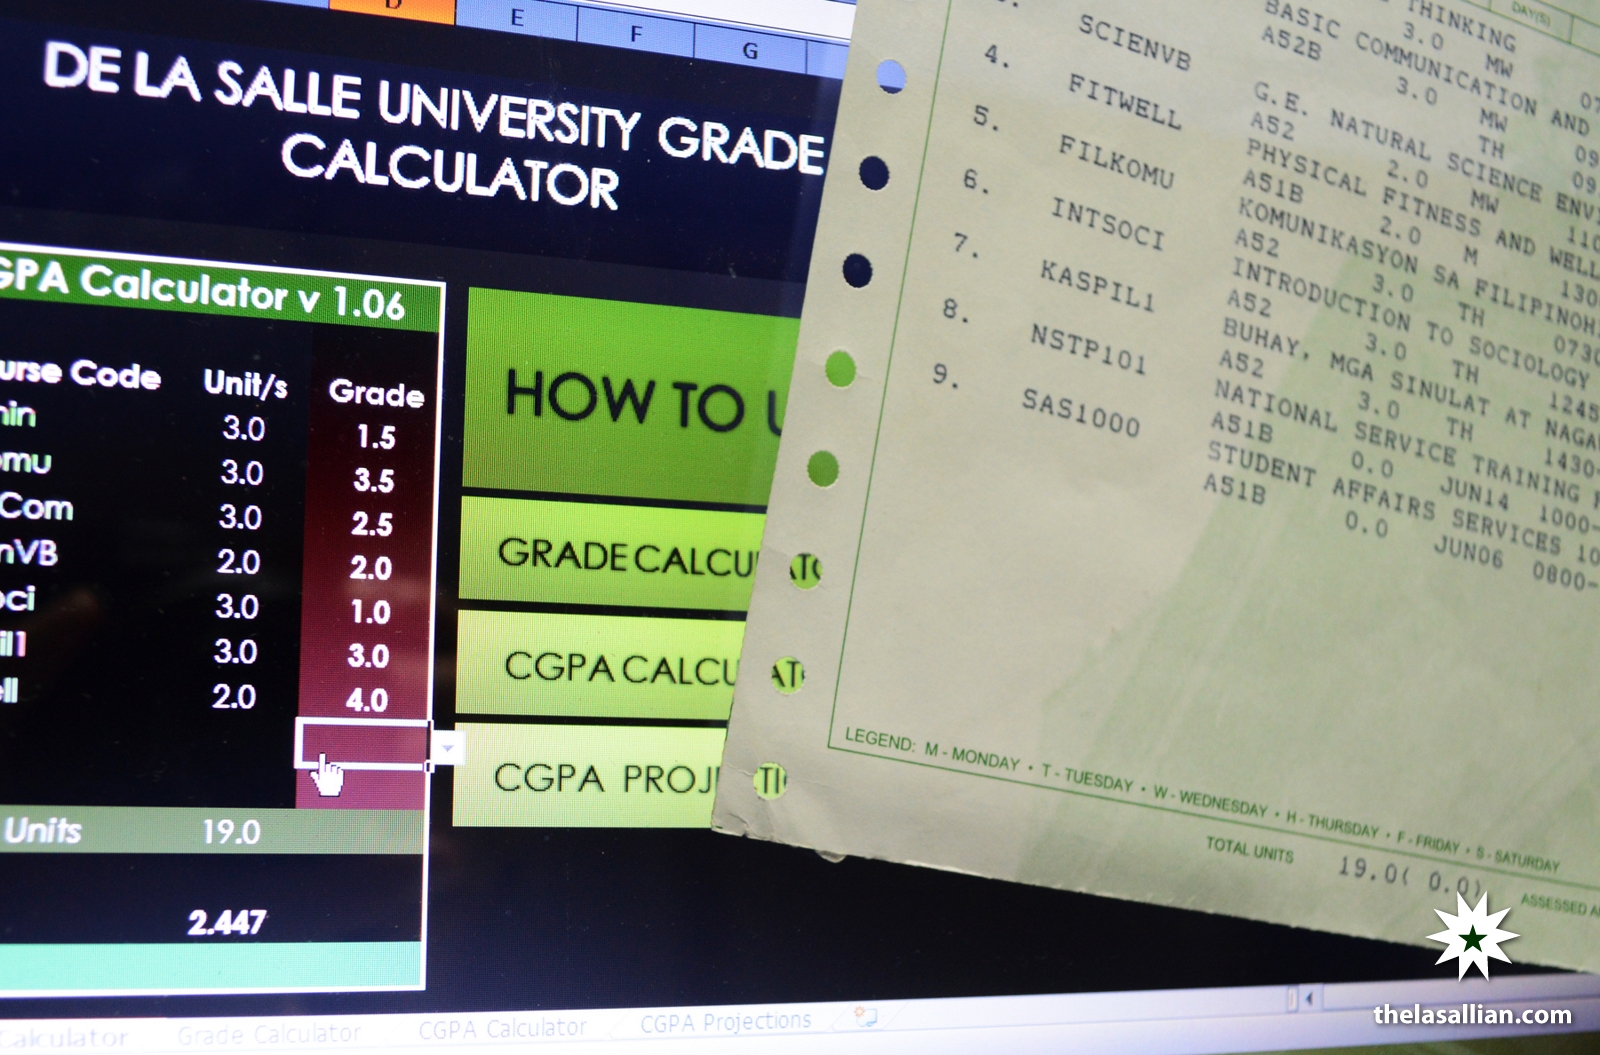 students-professors-seek-more-accurate-grading-system-the-lasallian